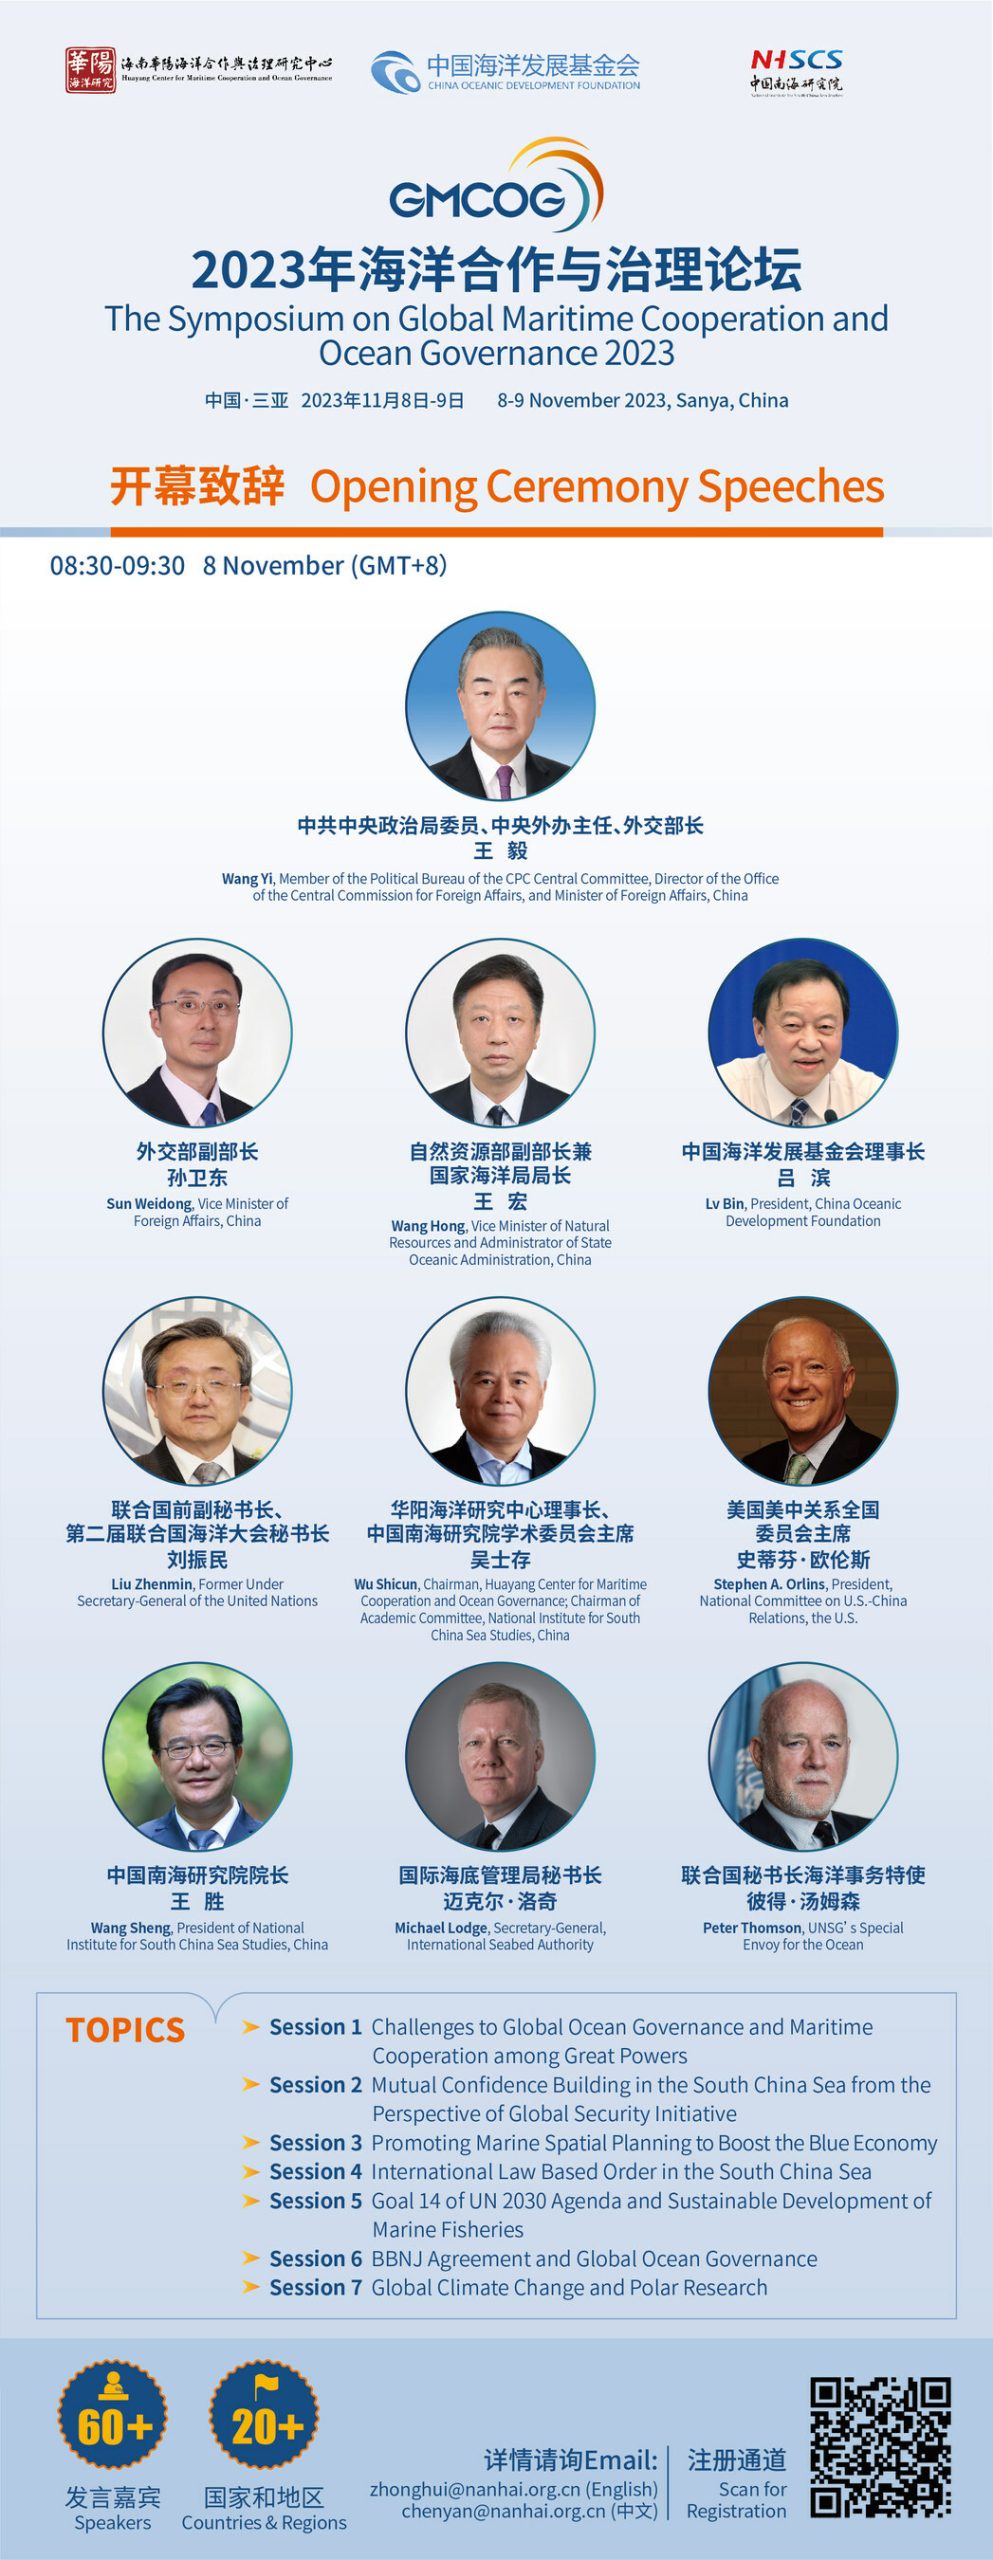 The 2023 Symposium on Global Maritime Cooperation and Ocean Governance to be Held in Sanya